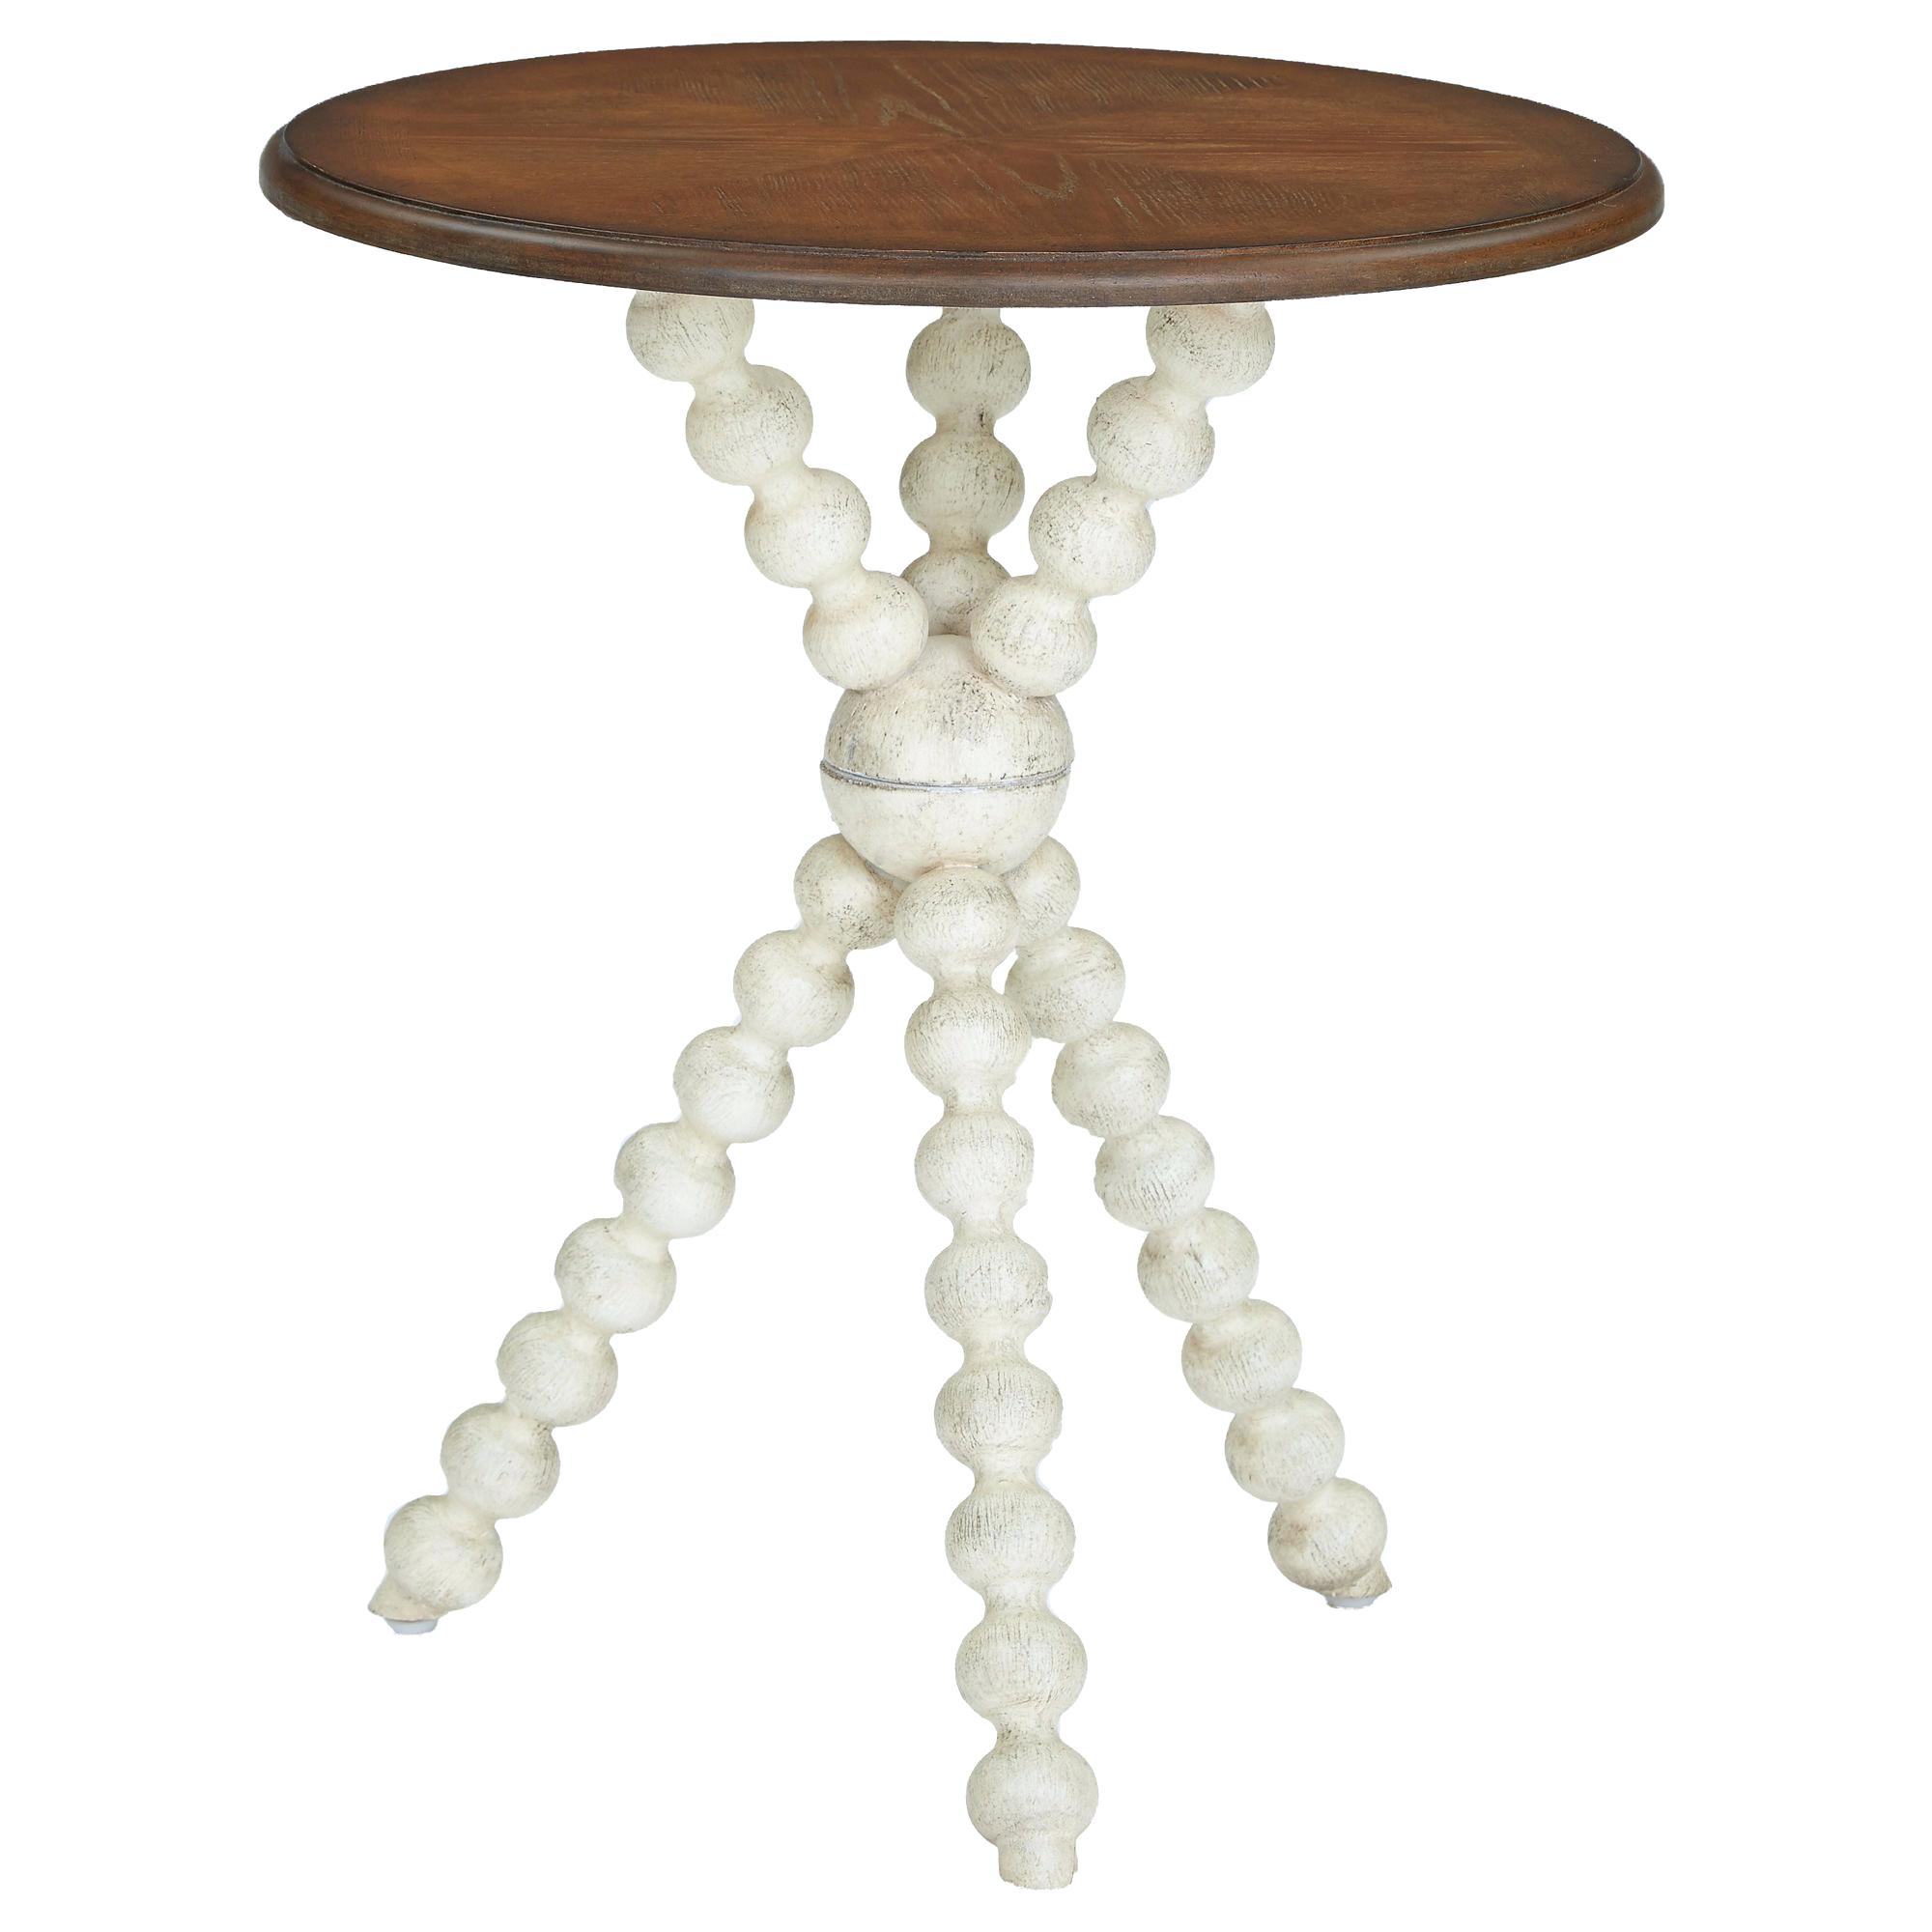 cream accent table black and colored tables distressed natural console colorful kitchen dining room chairs west elm lighting tall lamp for living clear glass winsome curved